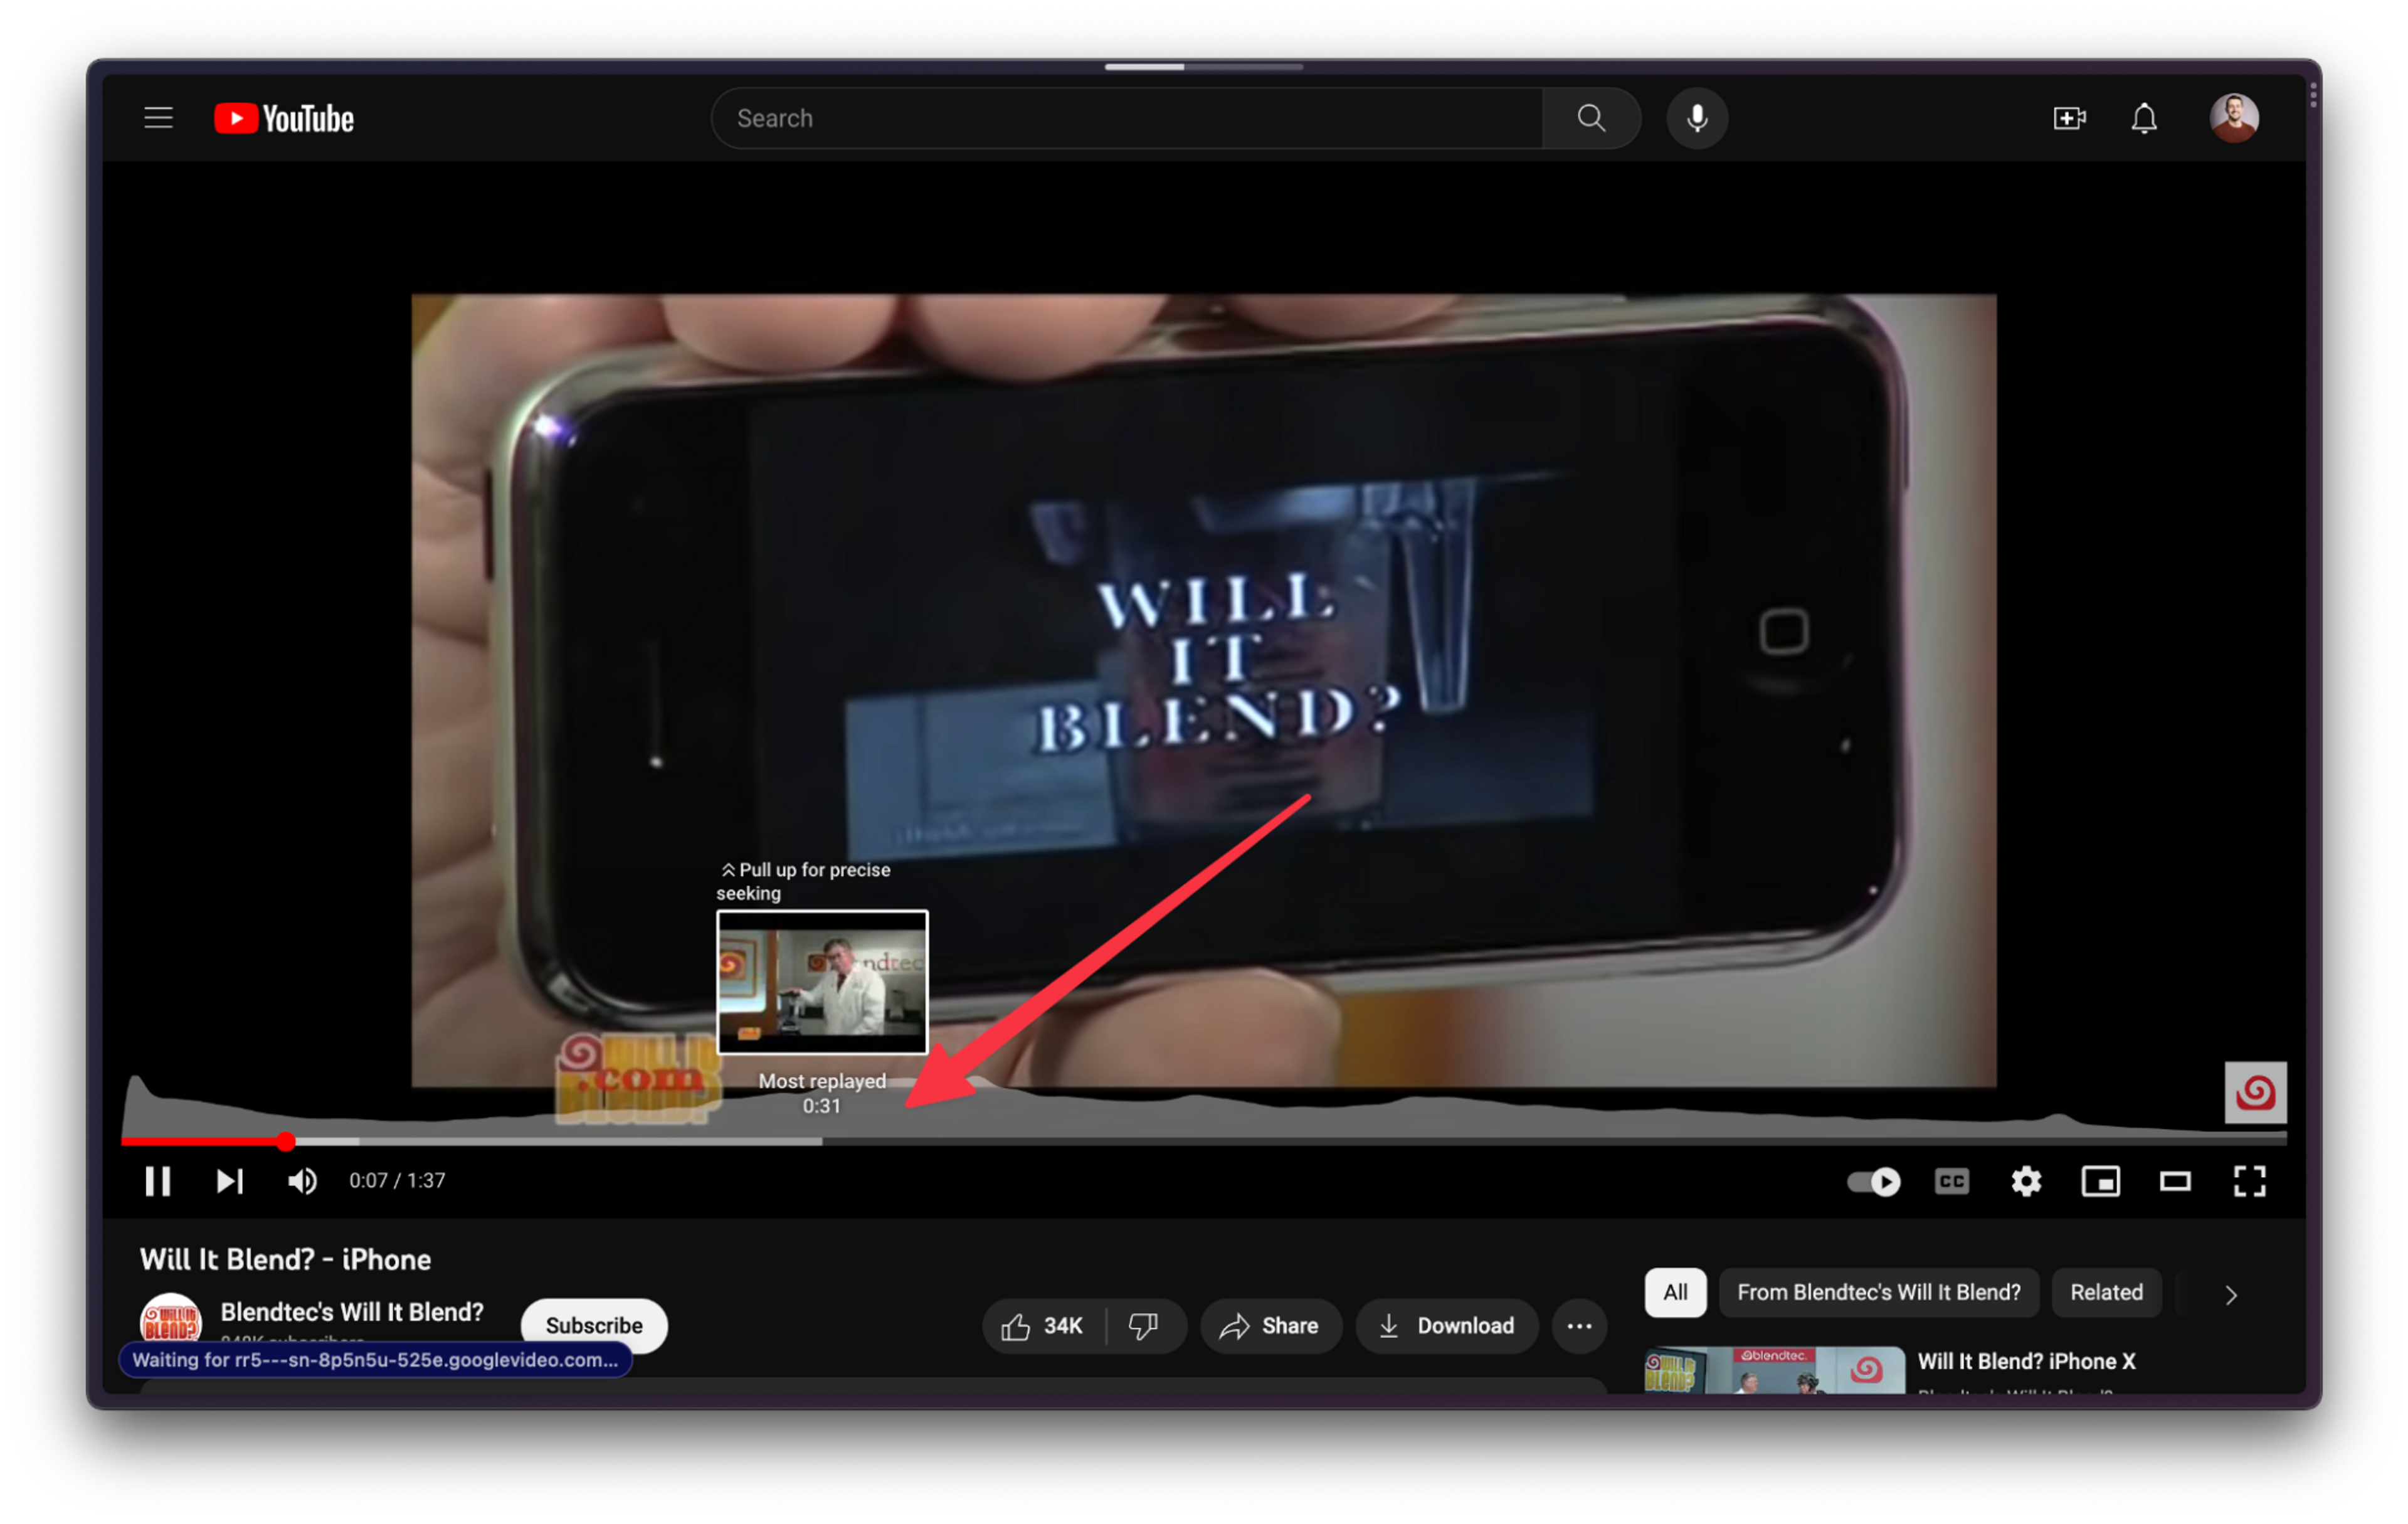 A screenshot of a YouTube player. The "Will it Blend? - iPhone" video is loaded, and a viewing activity heatmap is visible as an overlay on the bottom of the video. An arrow points to a peak of the heatmap area chart.